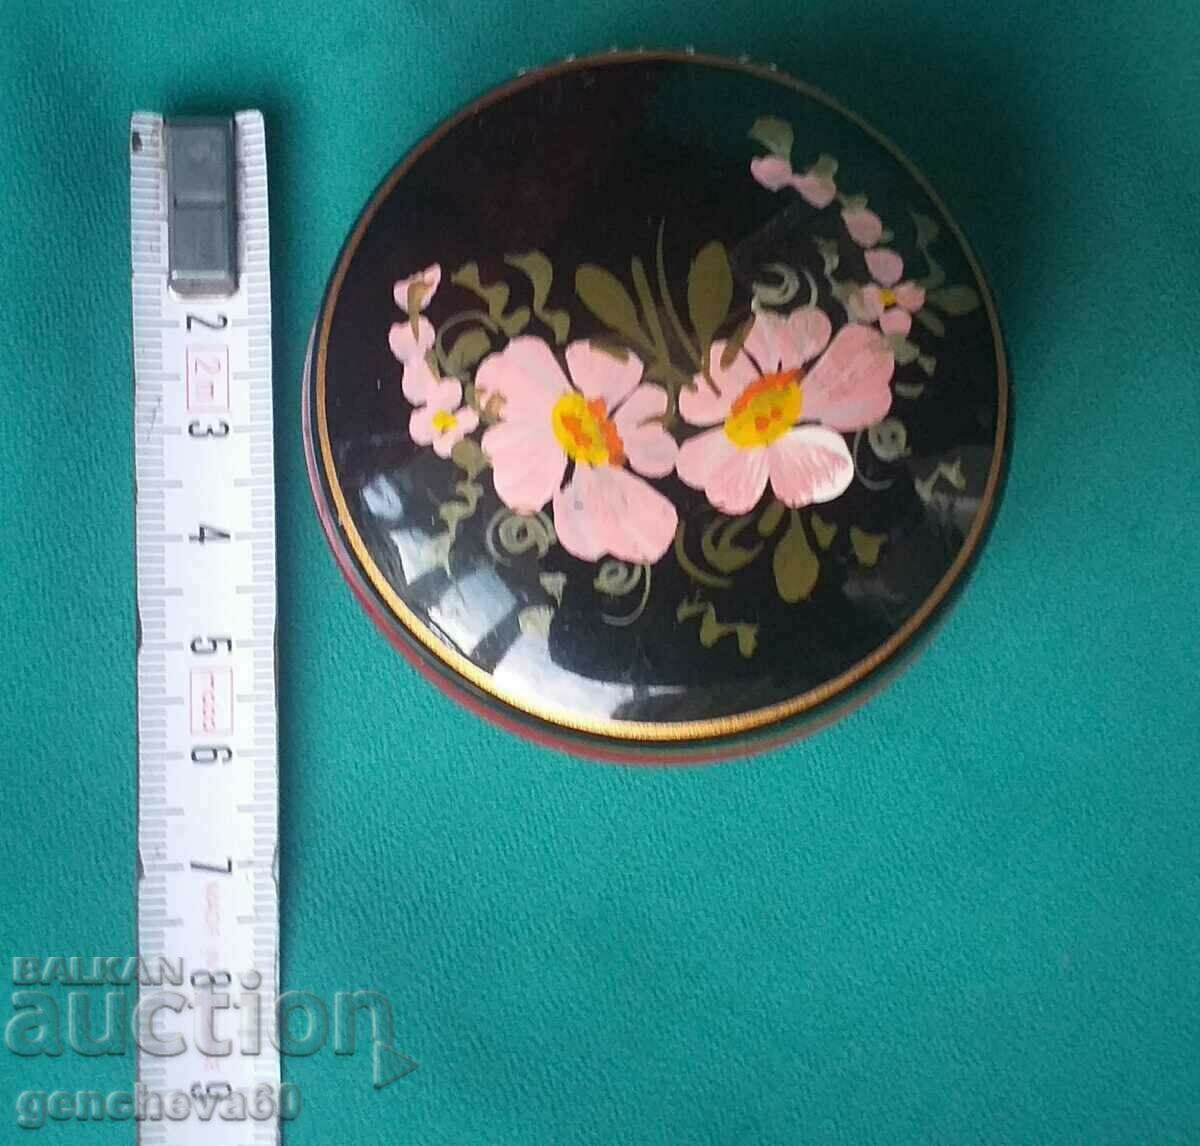 Porcelain jewelry box with floral motifs